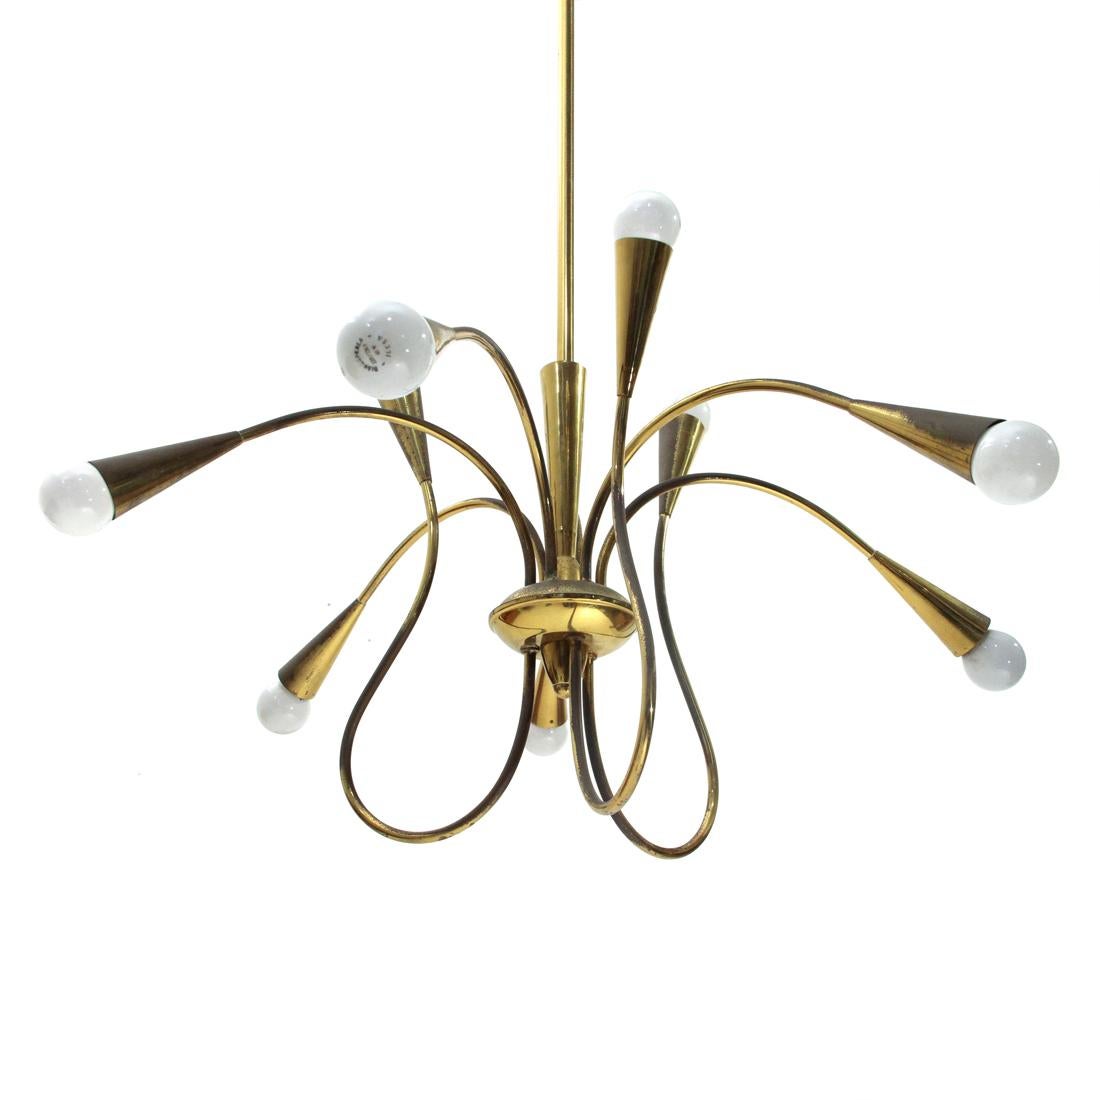 Italian-made chandelier produced in the 1950s.
Brass rose, stem, arms and shades.
Good general conditions, some signs due to normal use over time.

Dimensions: Diameter 70 cm - Diffuser height 43 cm - Total height 125 cm.